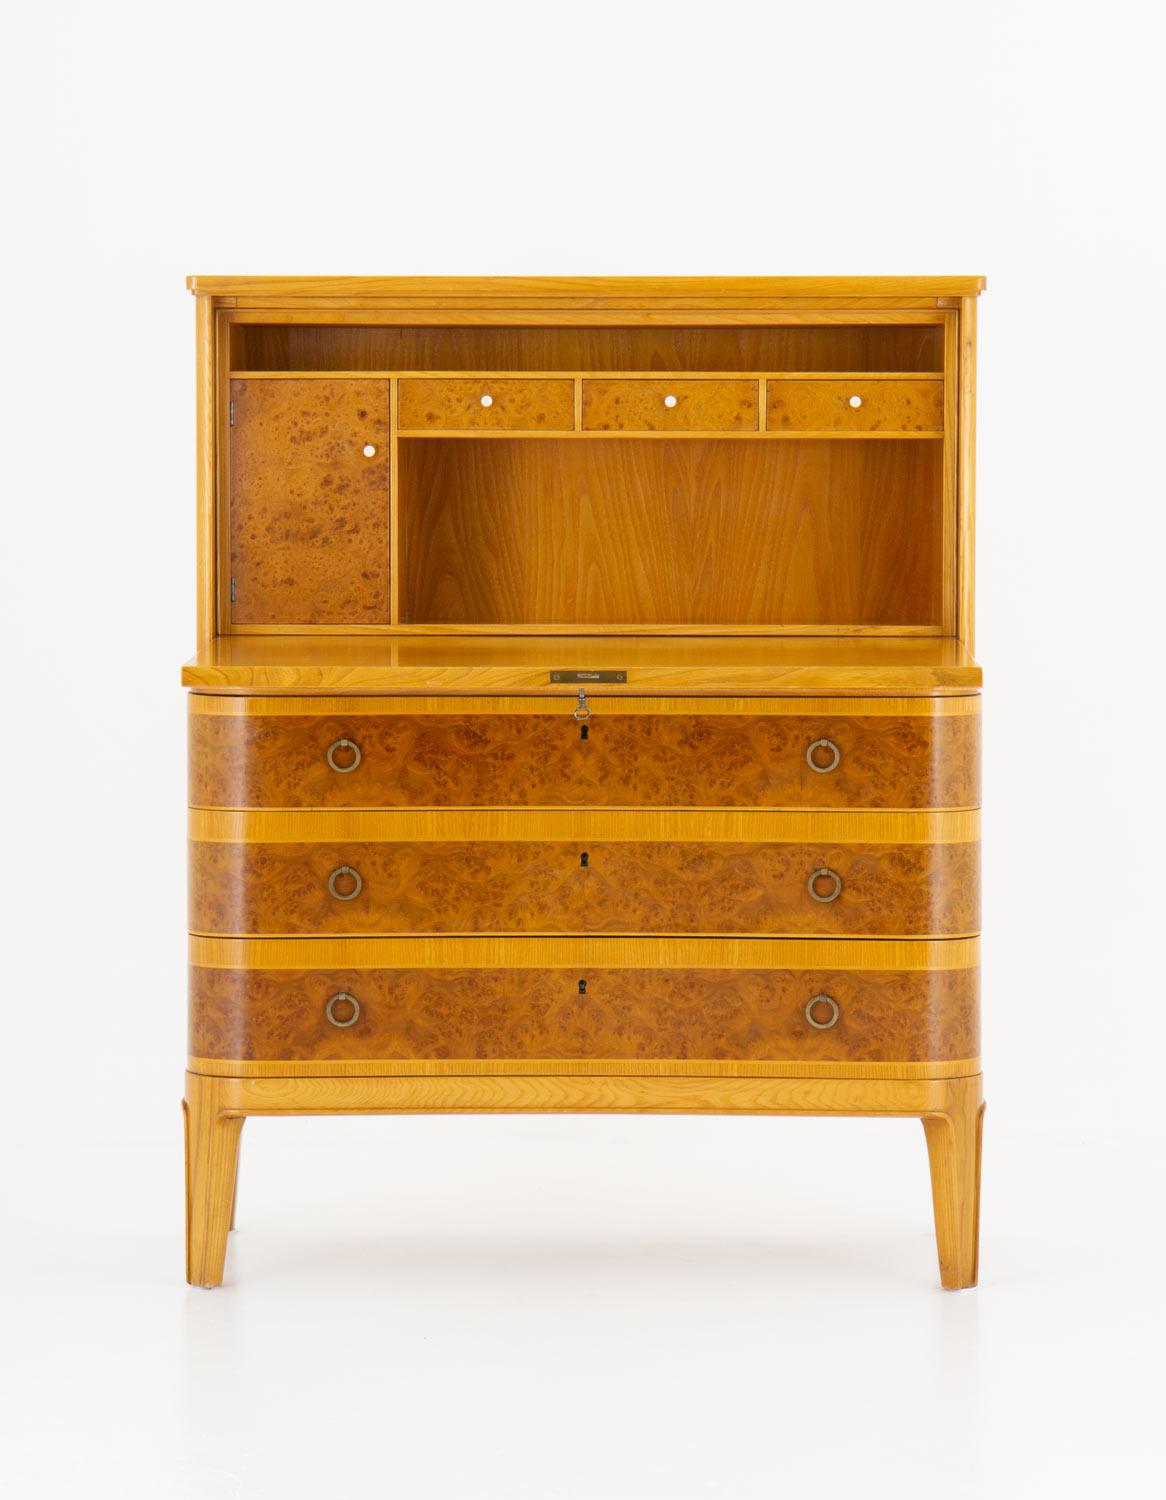 Beautiful bureau by Åby Möbelfabrik, Sweden, circa 1940.
This bureau is made of elm and elm root veneer. It consist of three drawers and one folding vertical door, hiding three small drawers and a locker. 
The construction quality of this piece is